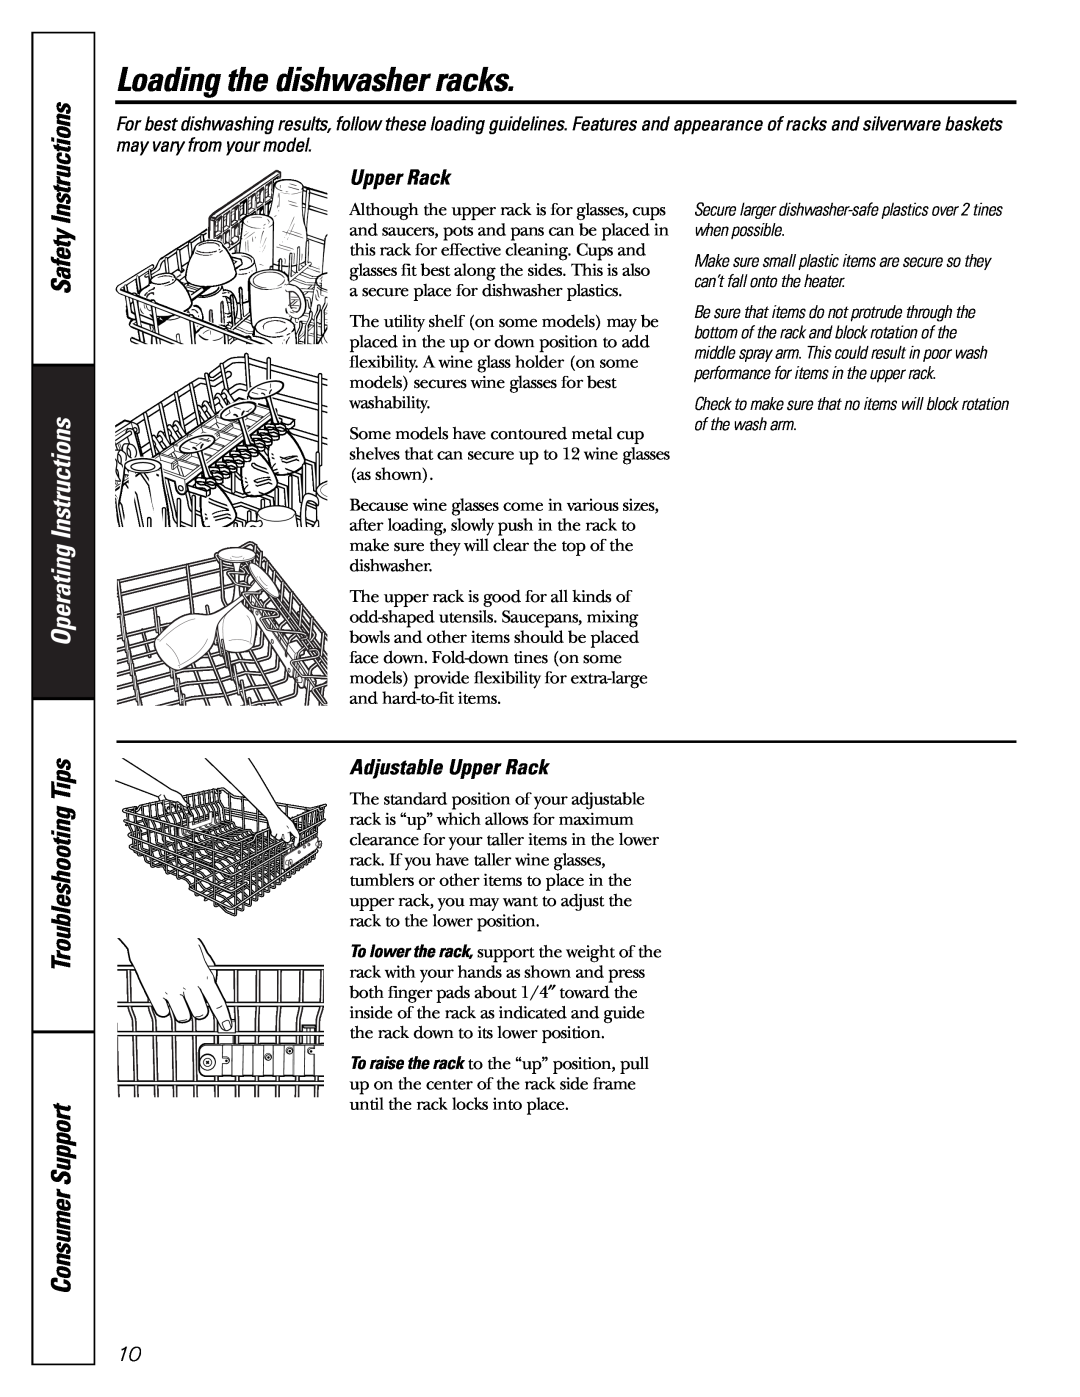 GE PDW8400 Series manual Adjustable Upper Rack, Safety, Operating Instructions, Troubleshooting Tips, Consumer Support 